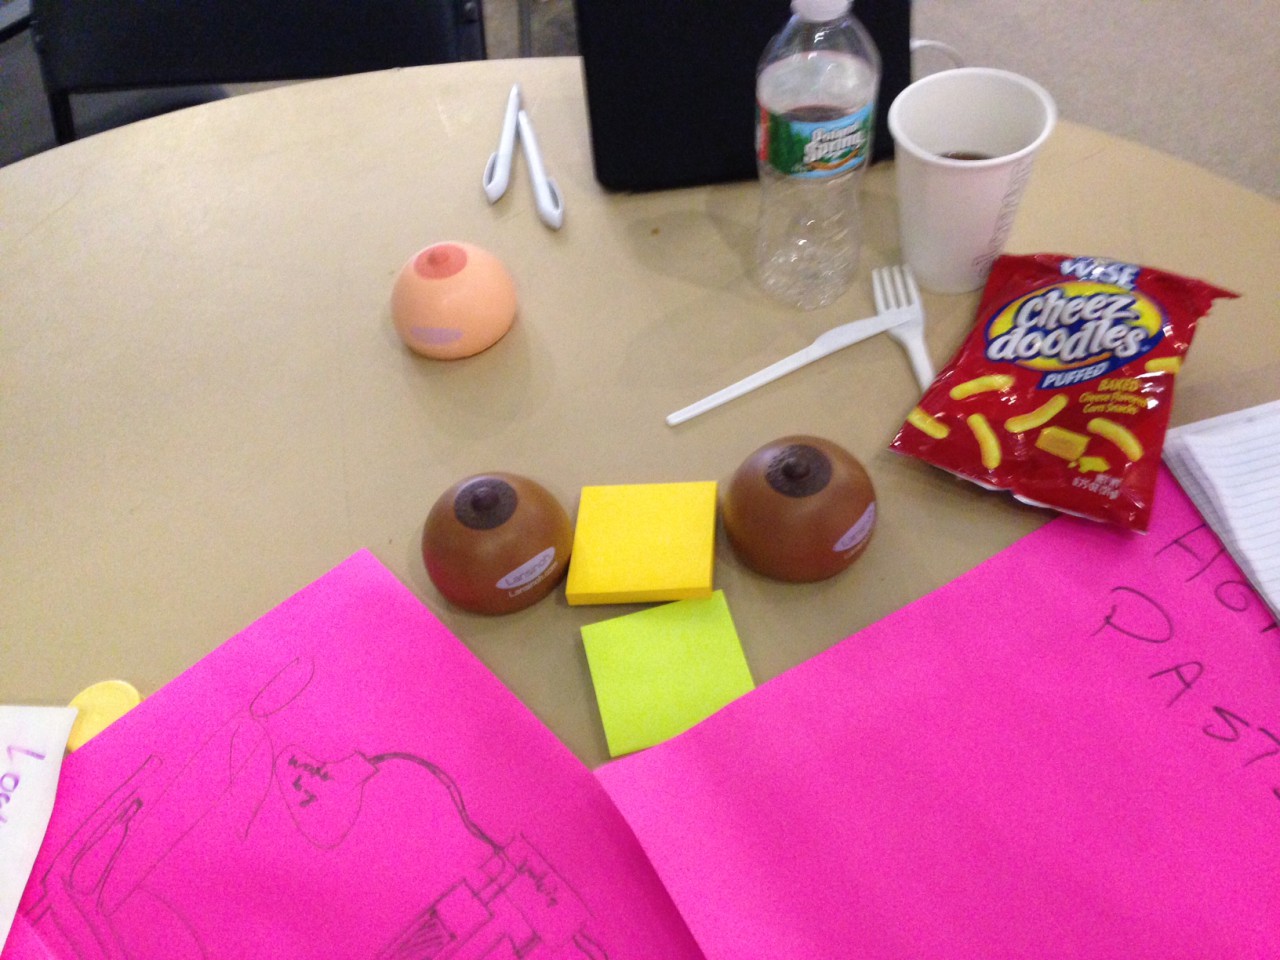 Detritus at hackathon's end includes junk food, coffee, diagrams and squeezable stress balls in the shape of breasts. (Carey Goldberg/WBUR)